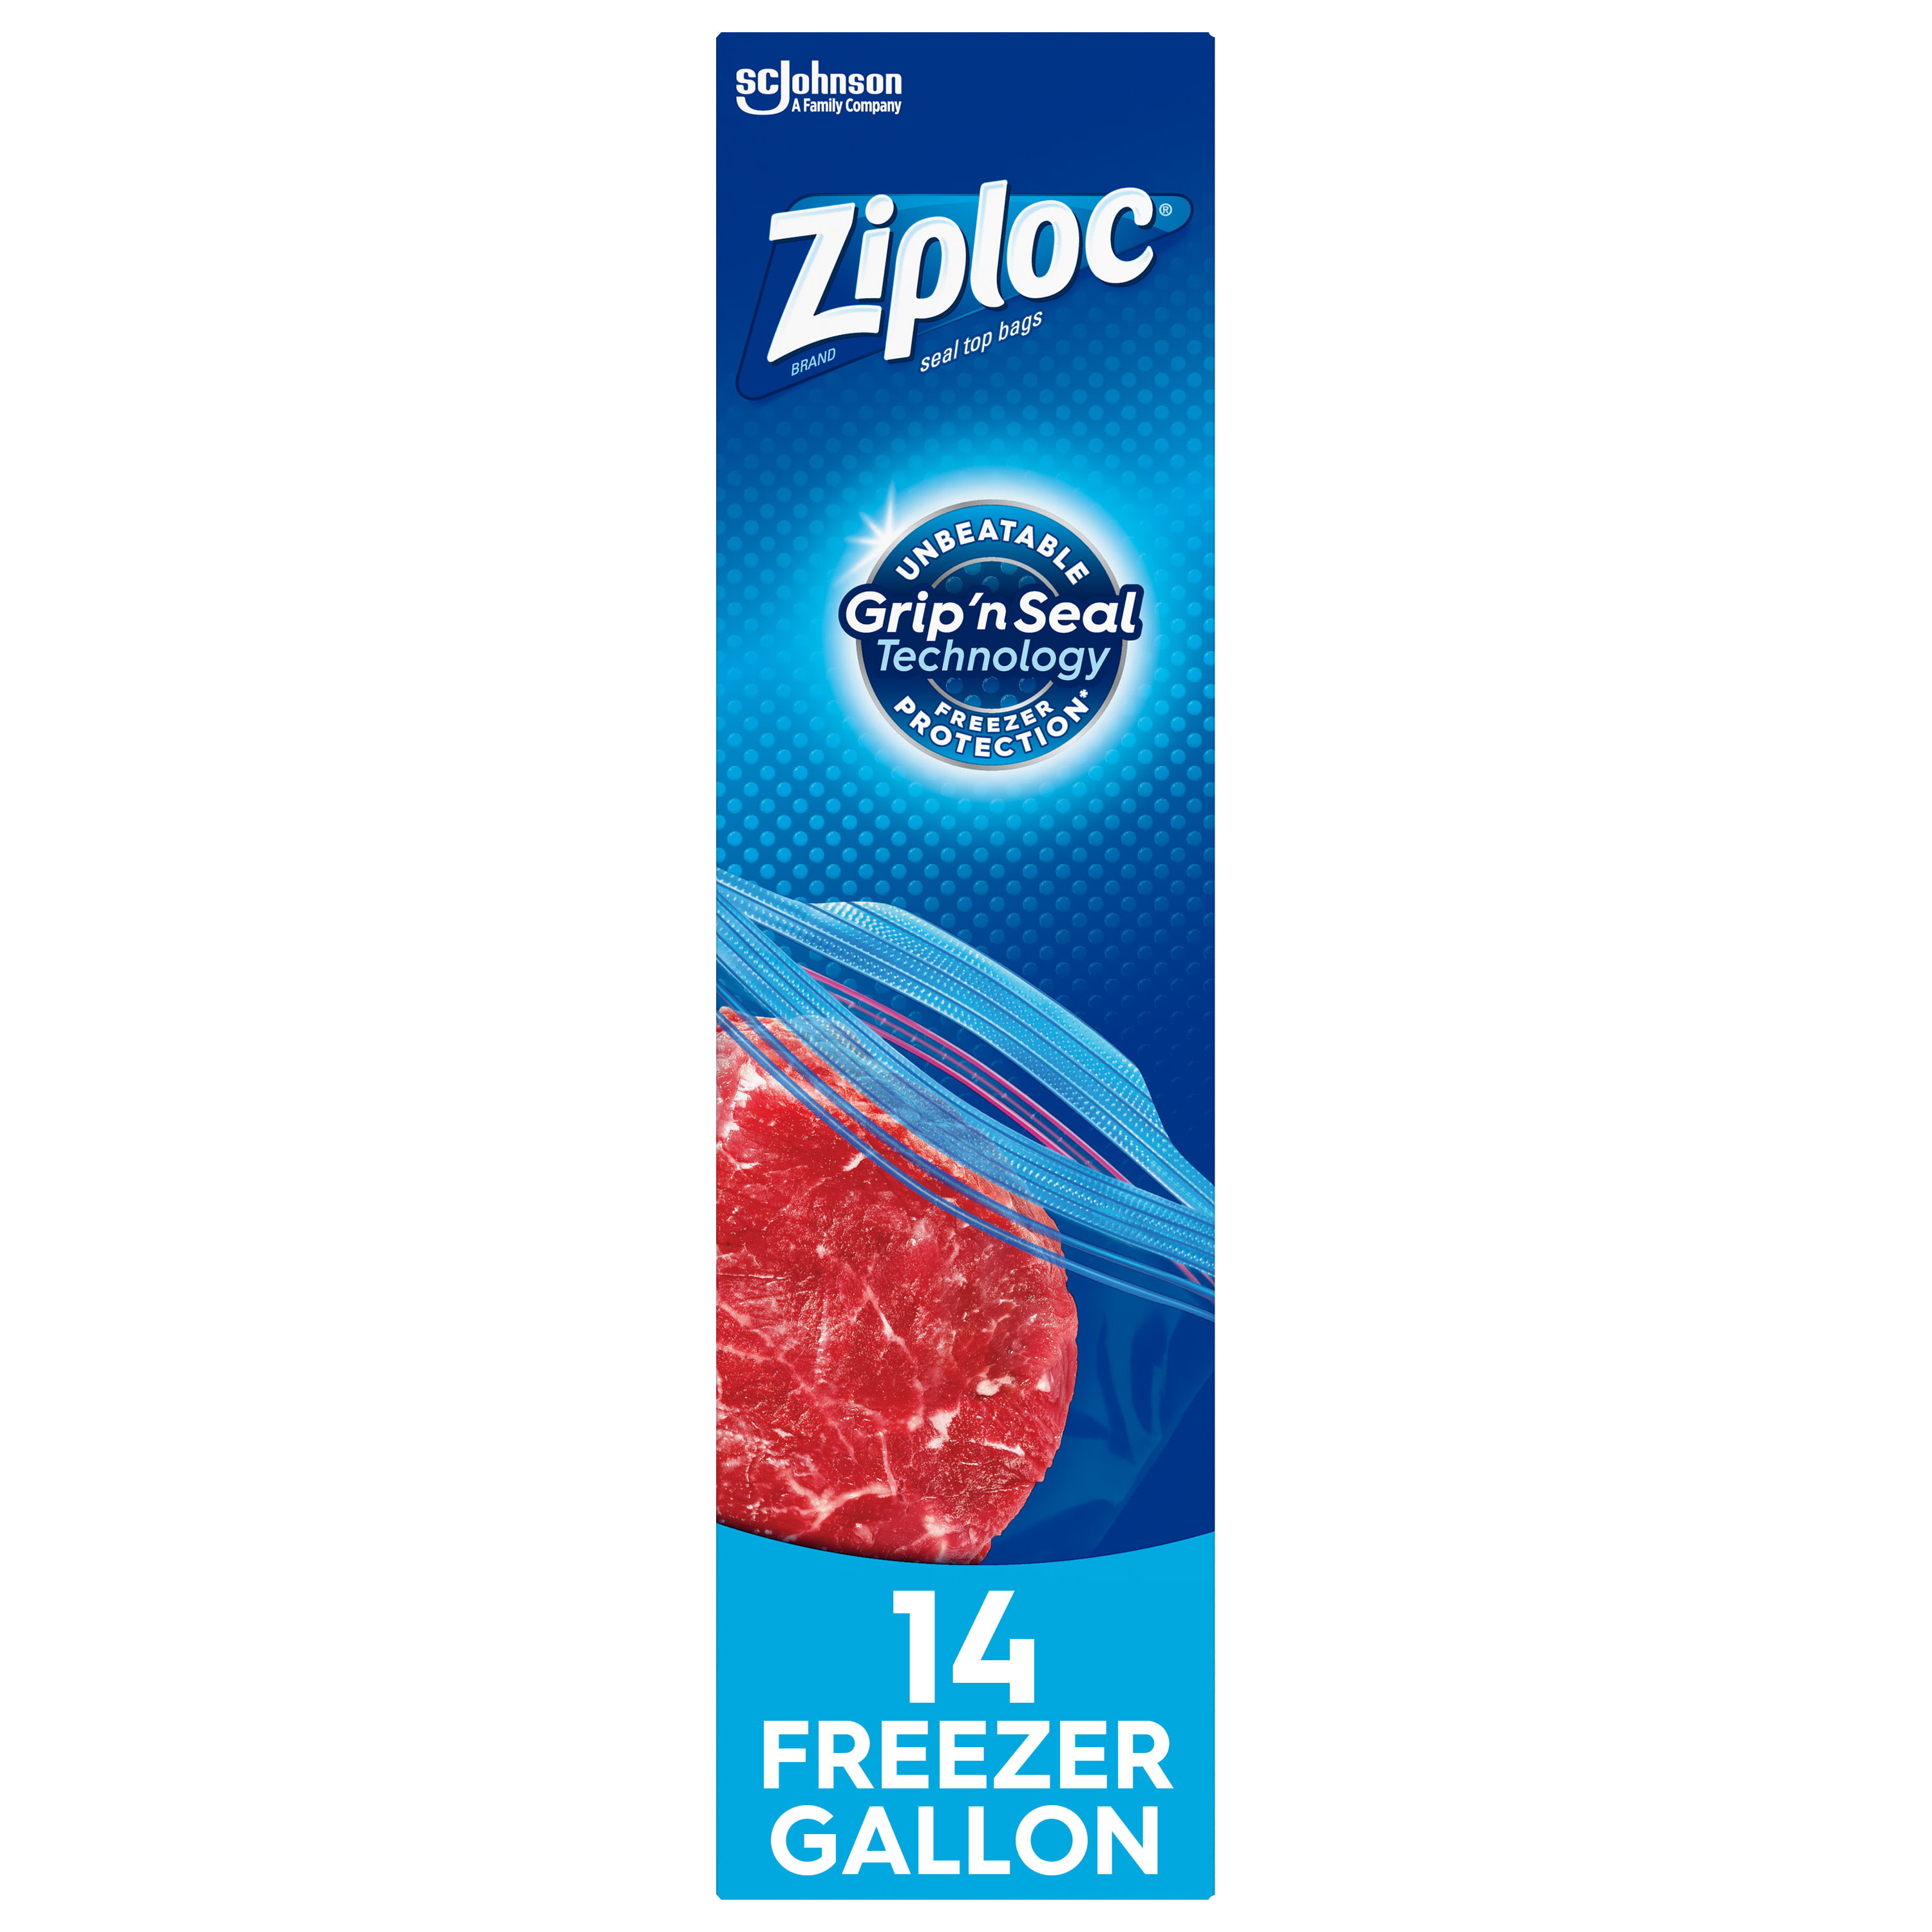 Ziploc Brand Freezer Gallon Bags with Grip 'n Seal Technology, 14 Count ...